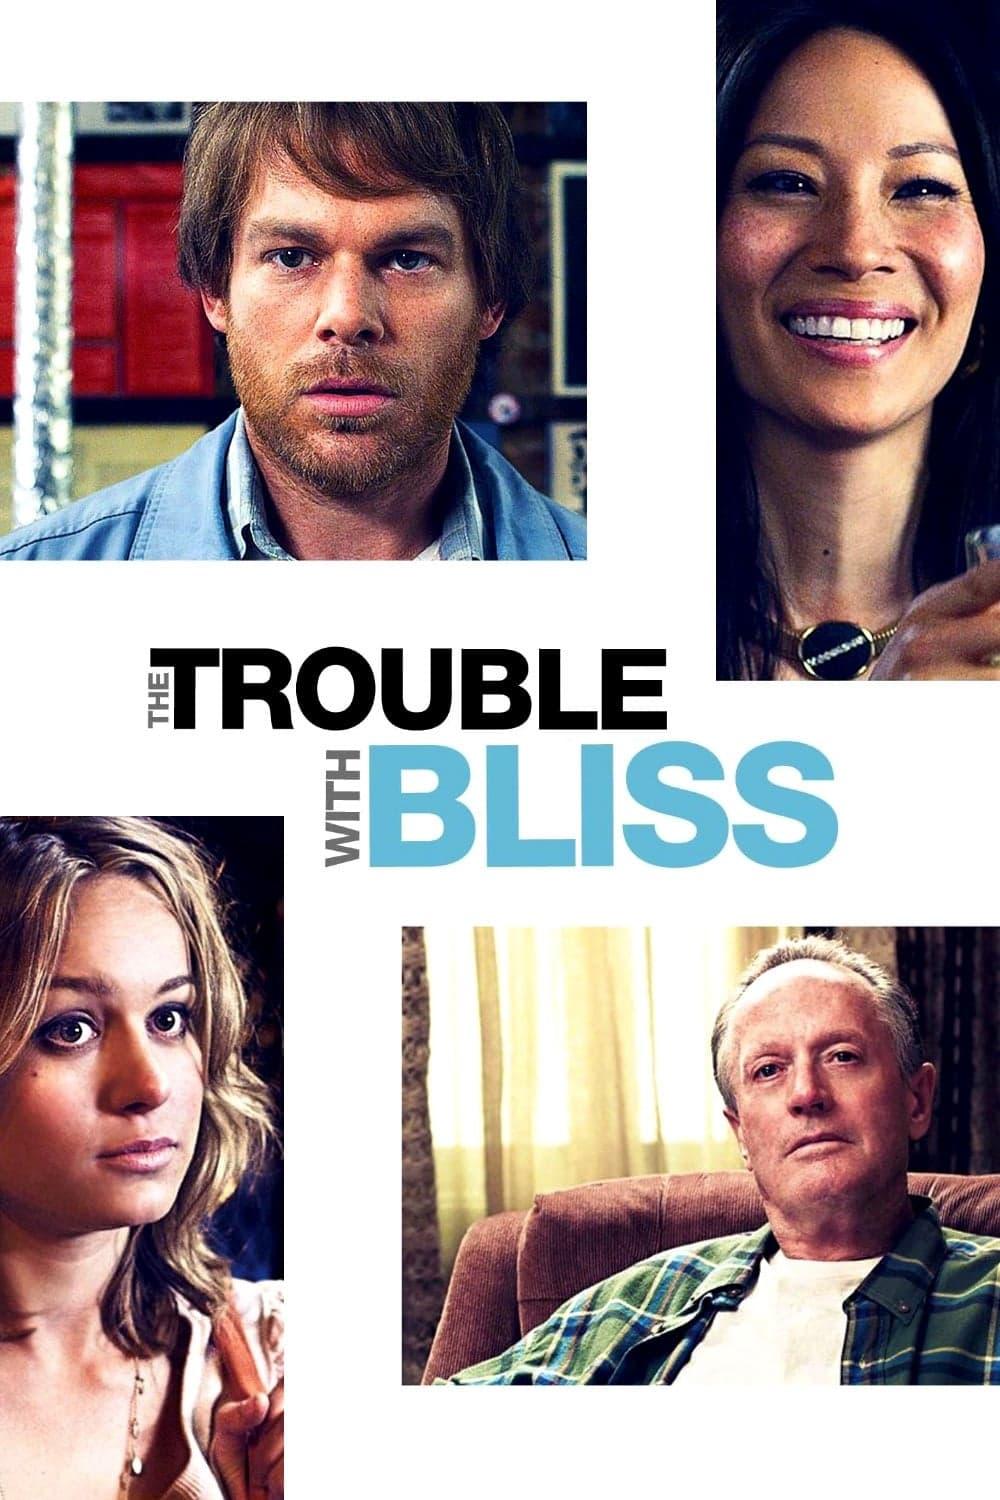 The Trouble With Bliss poster